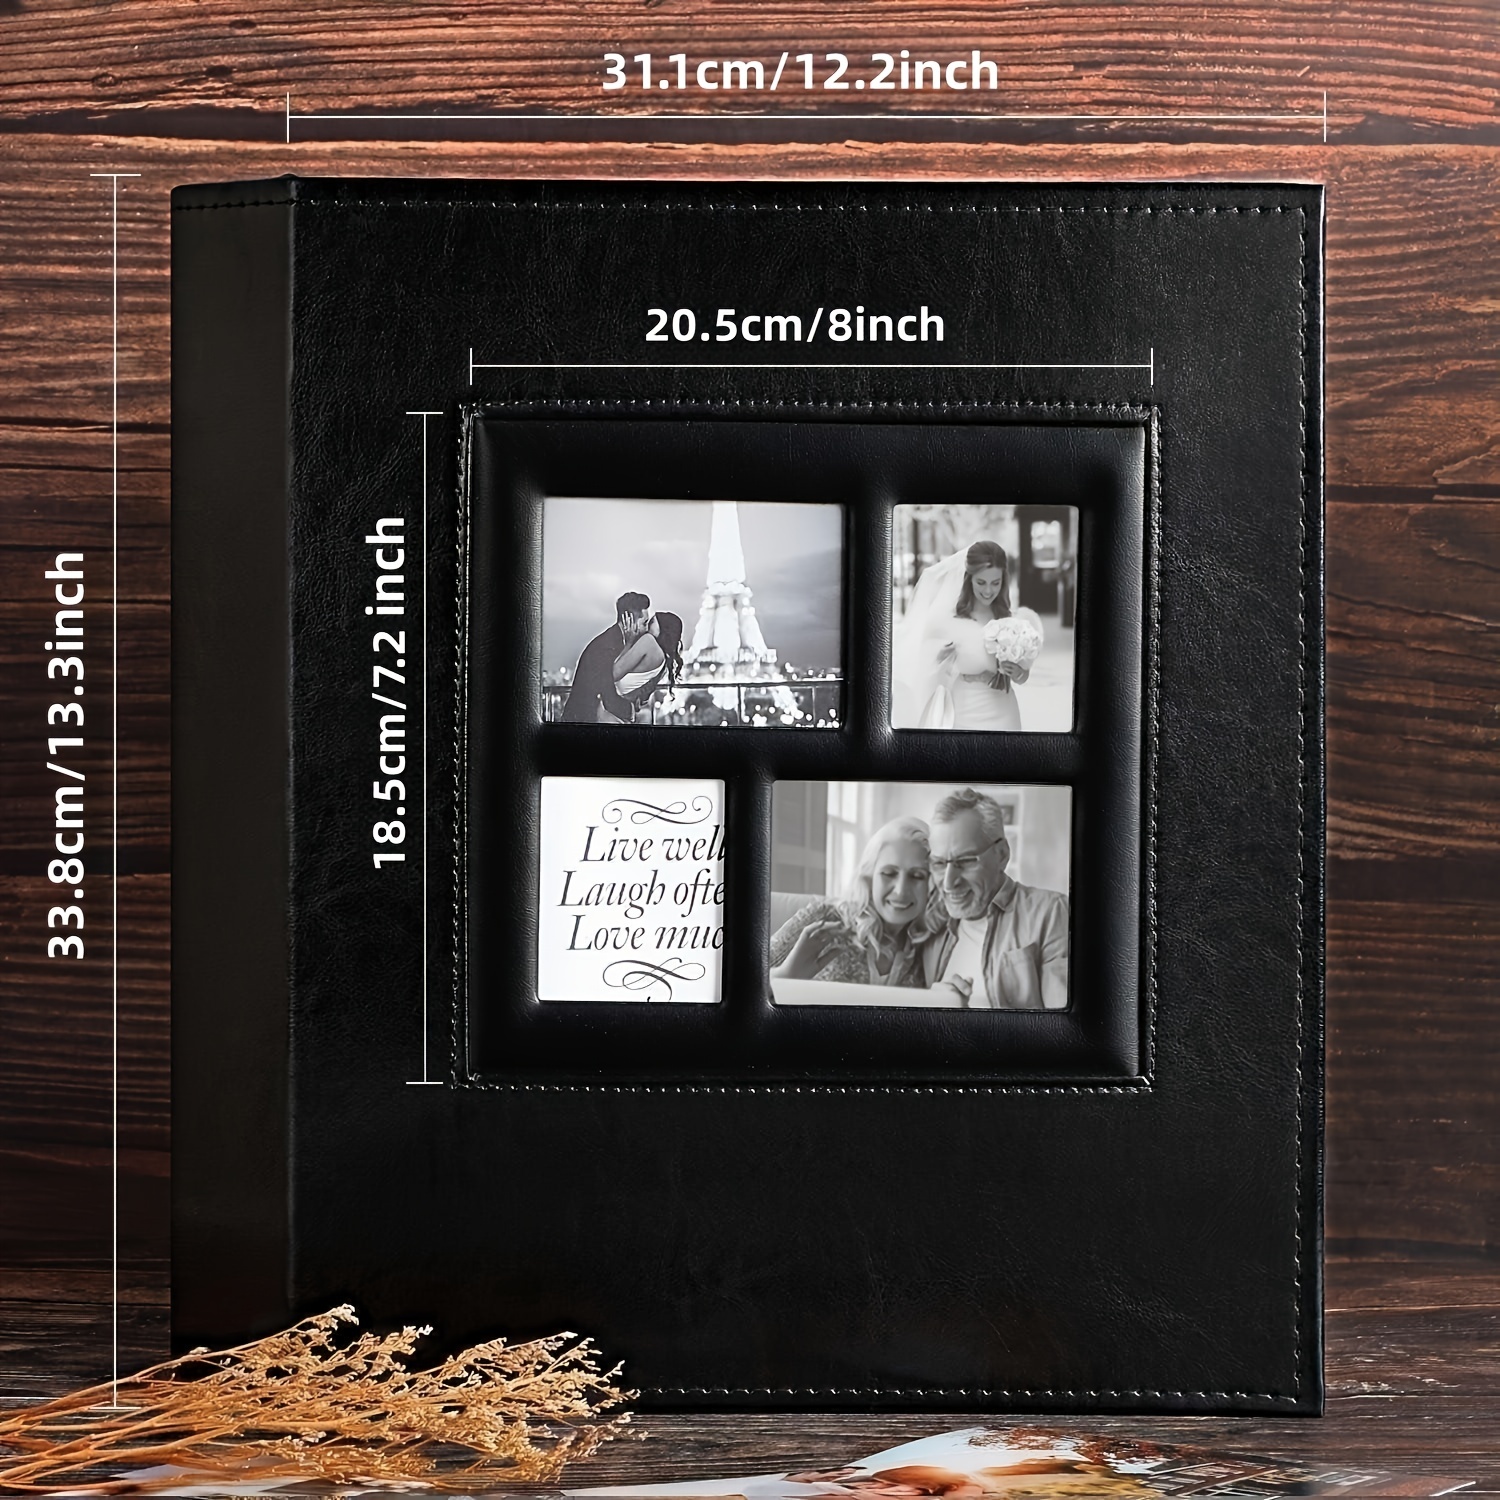 Set of 8 Mini Photo Albums for 4x6 Pictures UK